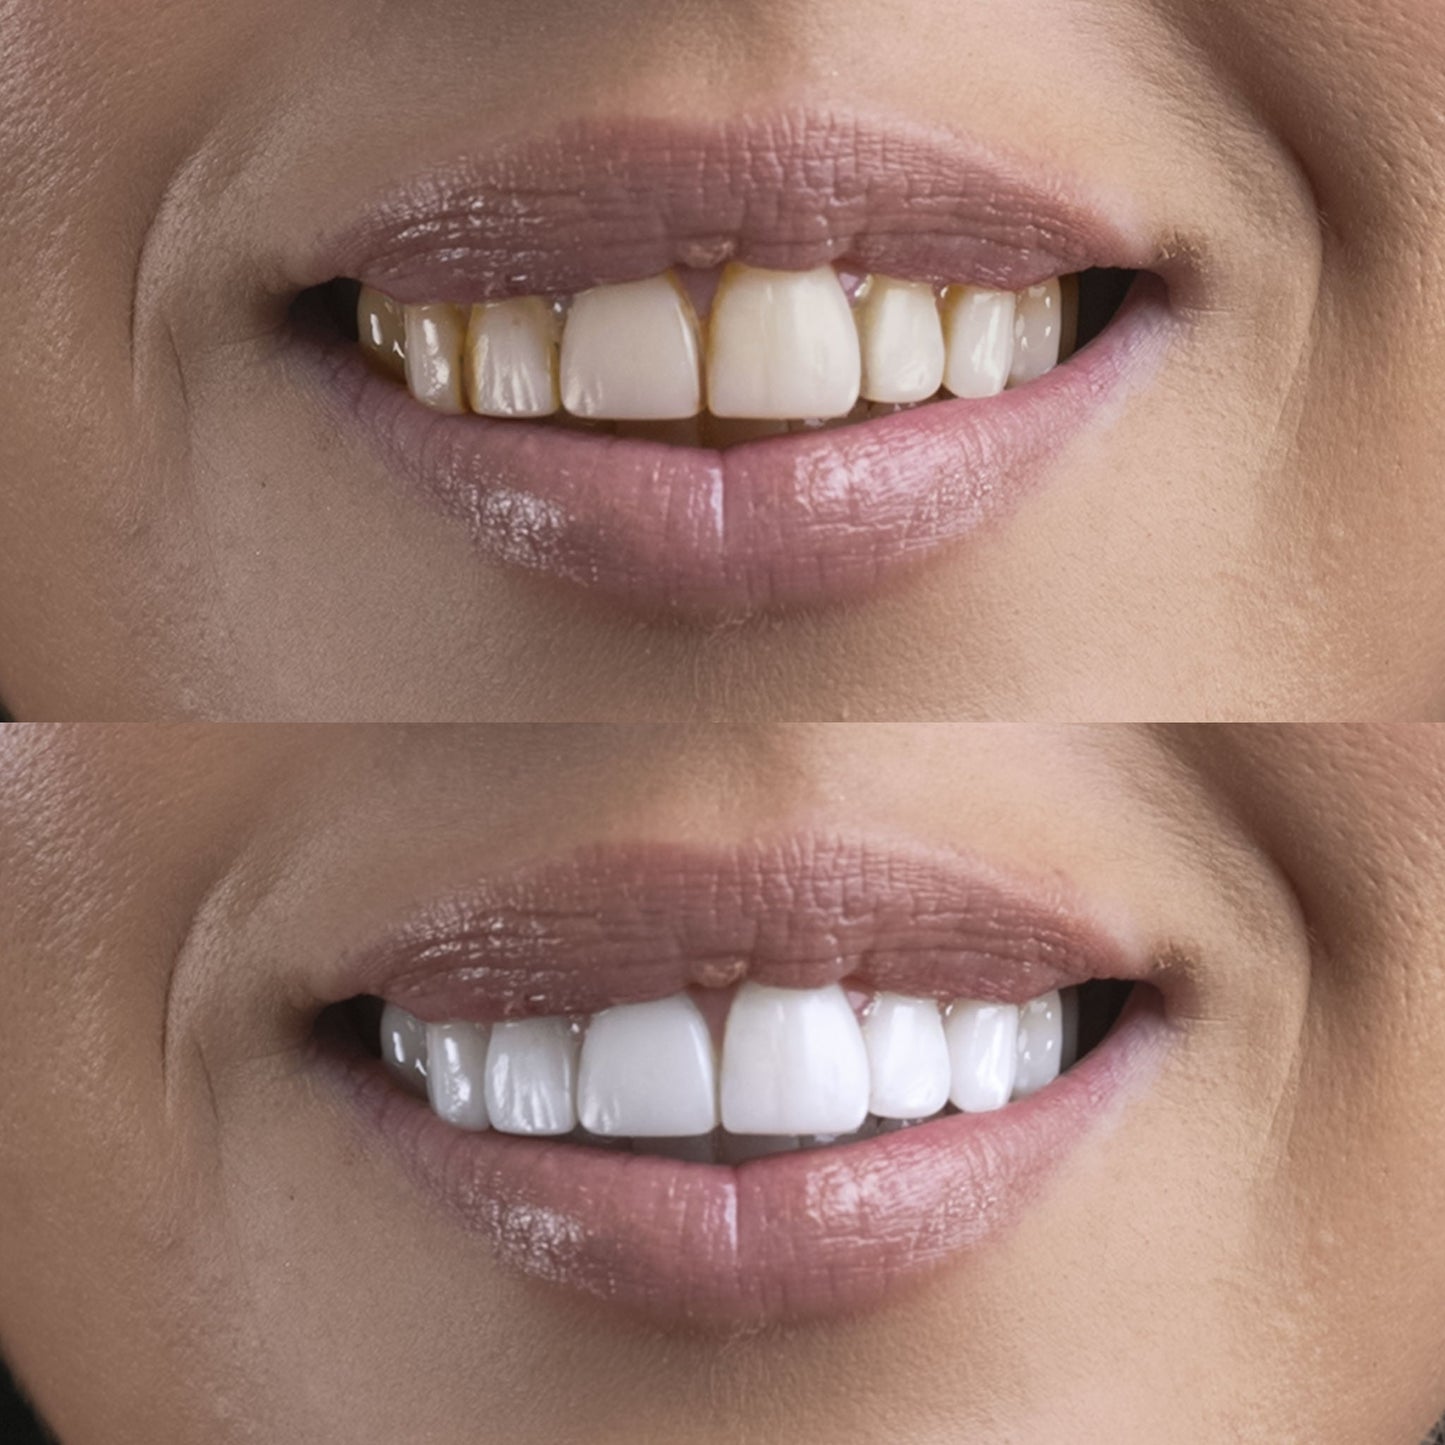 PAP Dentist Approved Teeth Whitening Powder